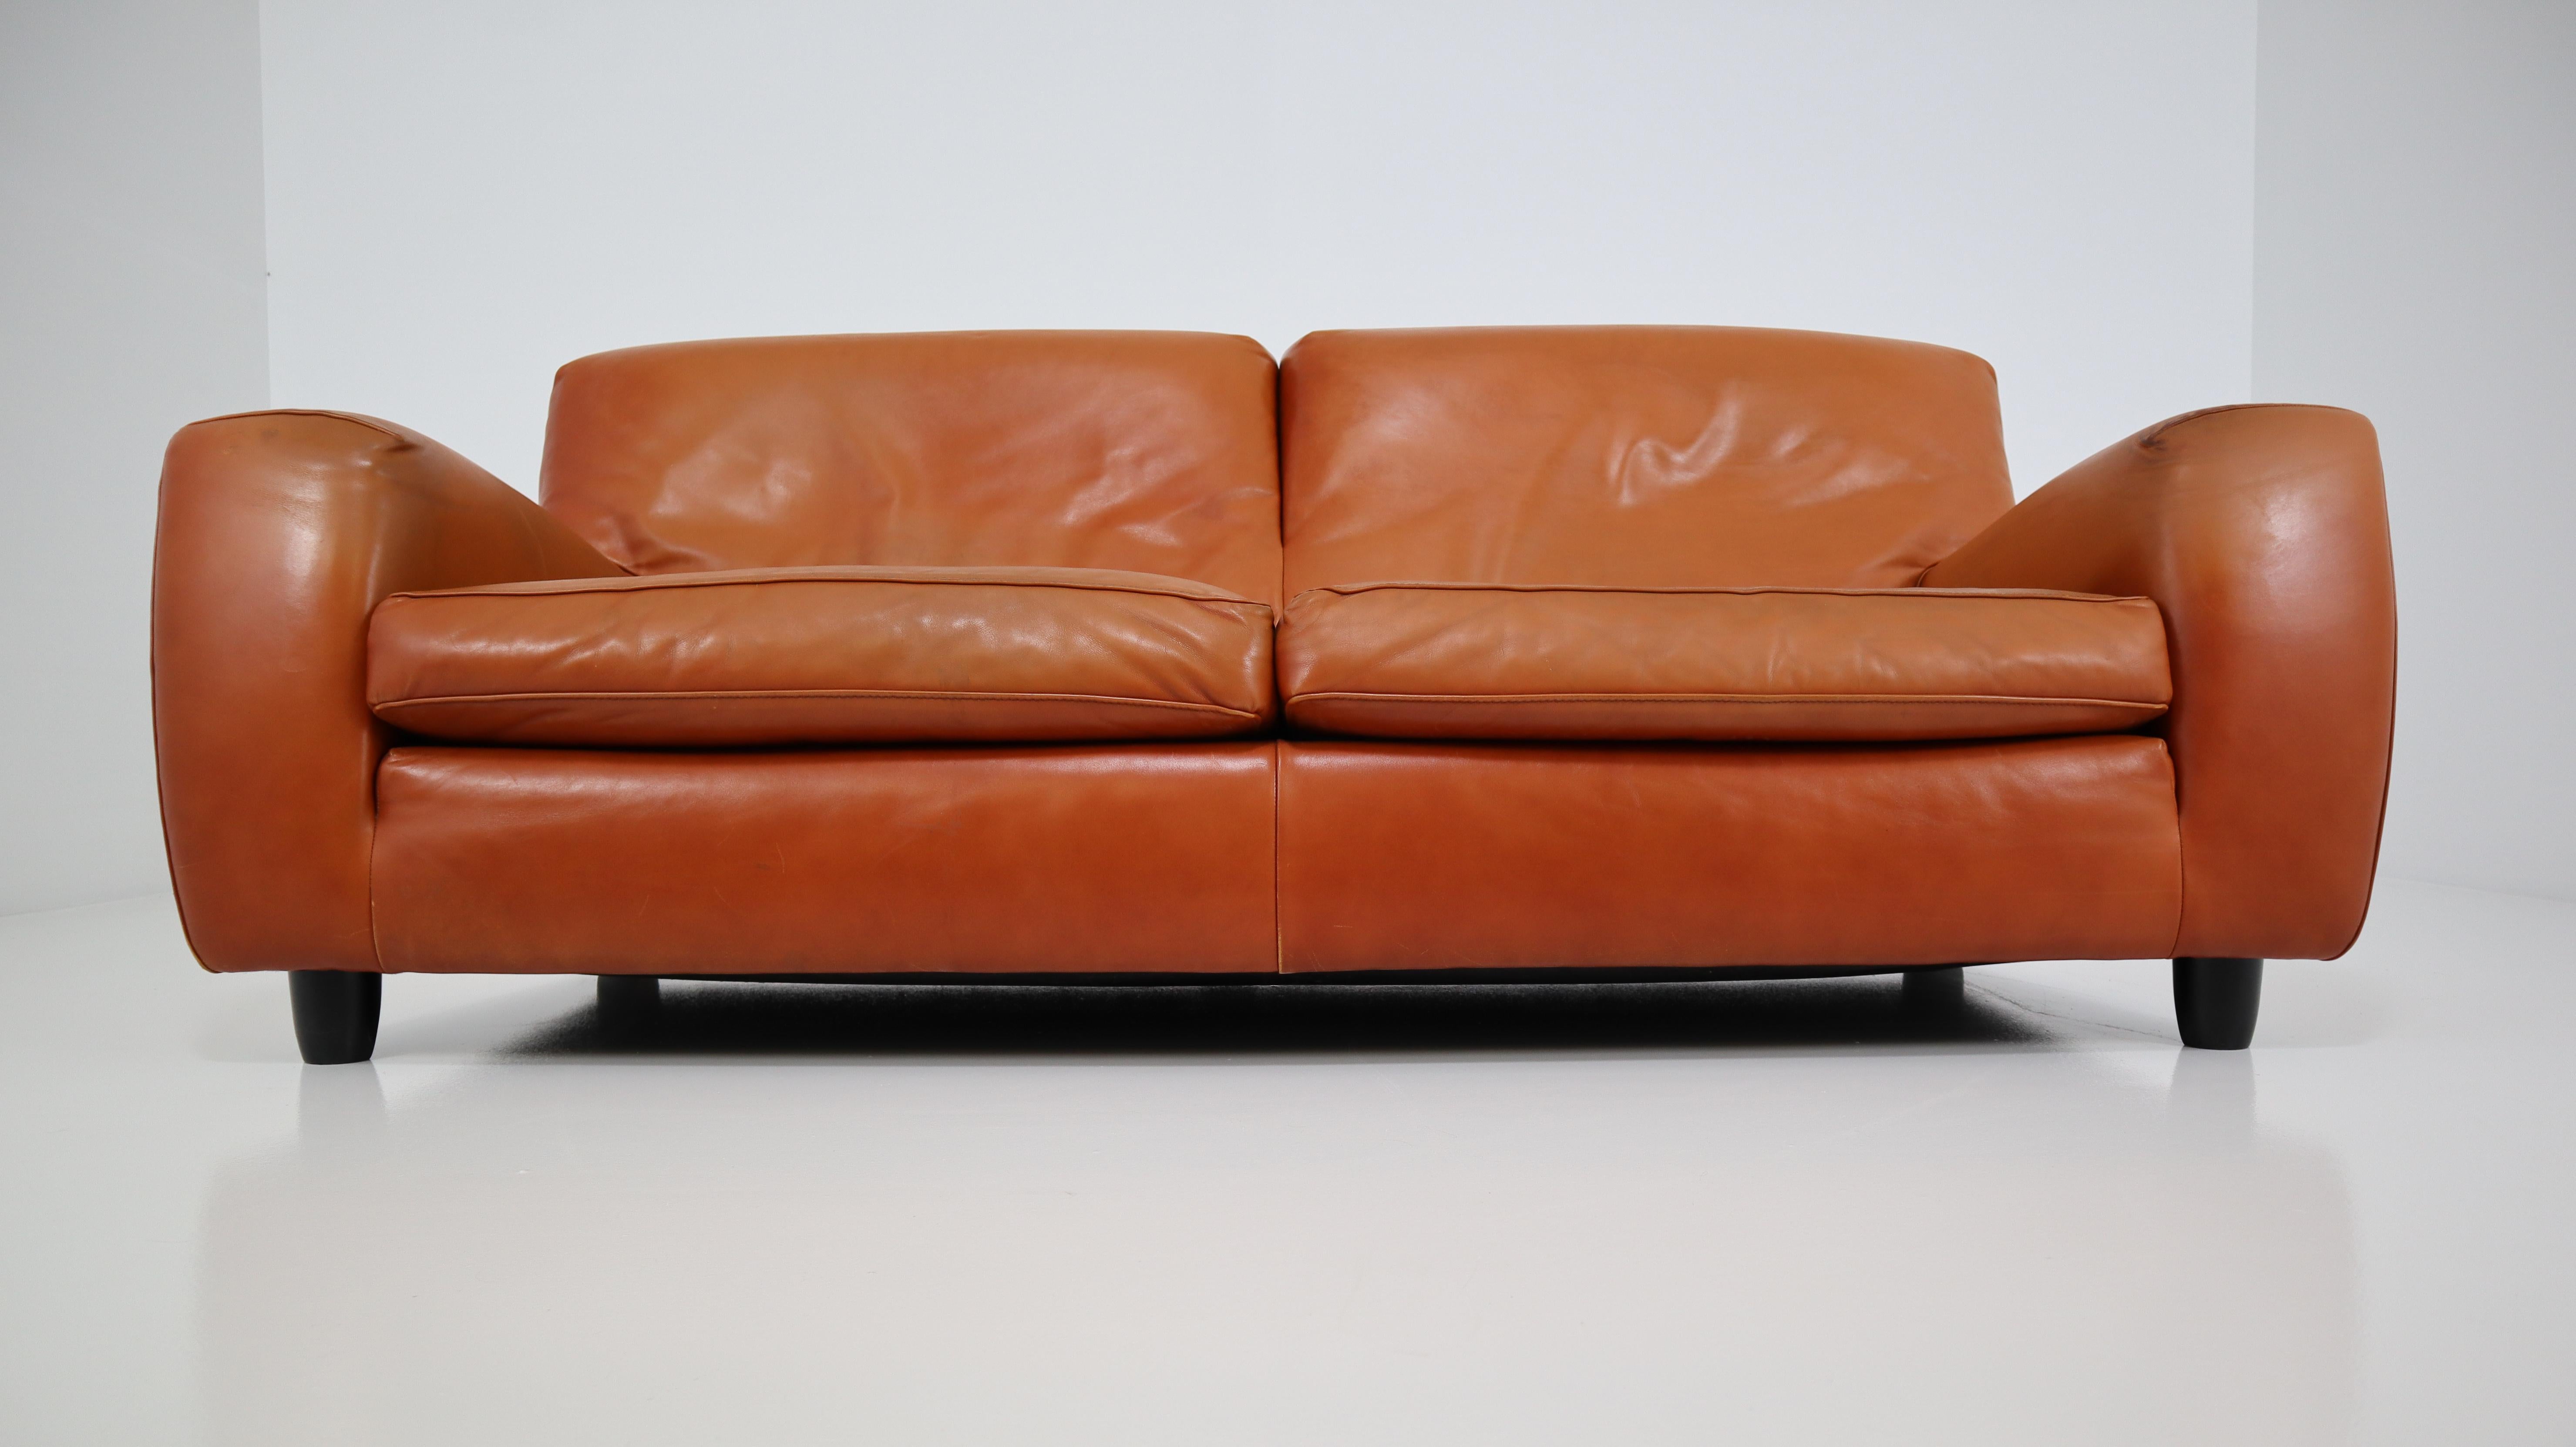 Big and comfortable natural Cognac bull leather sofa named 'Fatboy' handmade by the Italian company Molinari in the 1980s. The bulls leather is very thick and has a nice used patina.